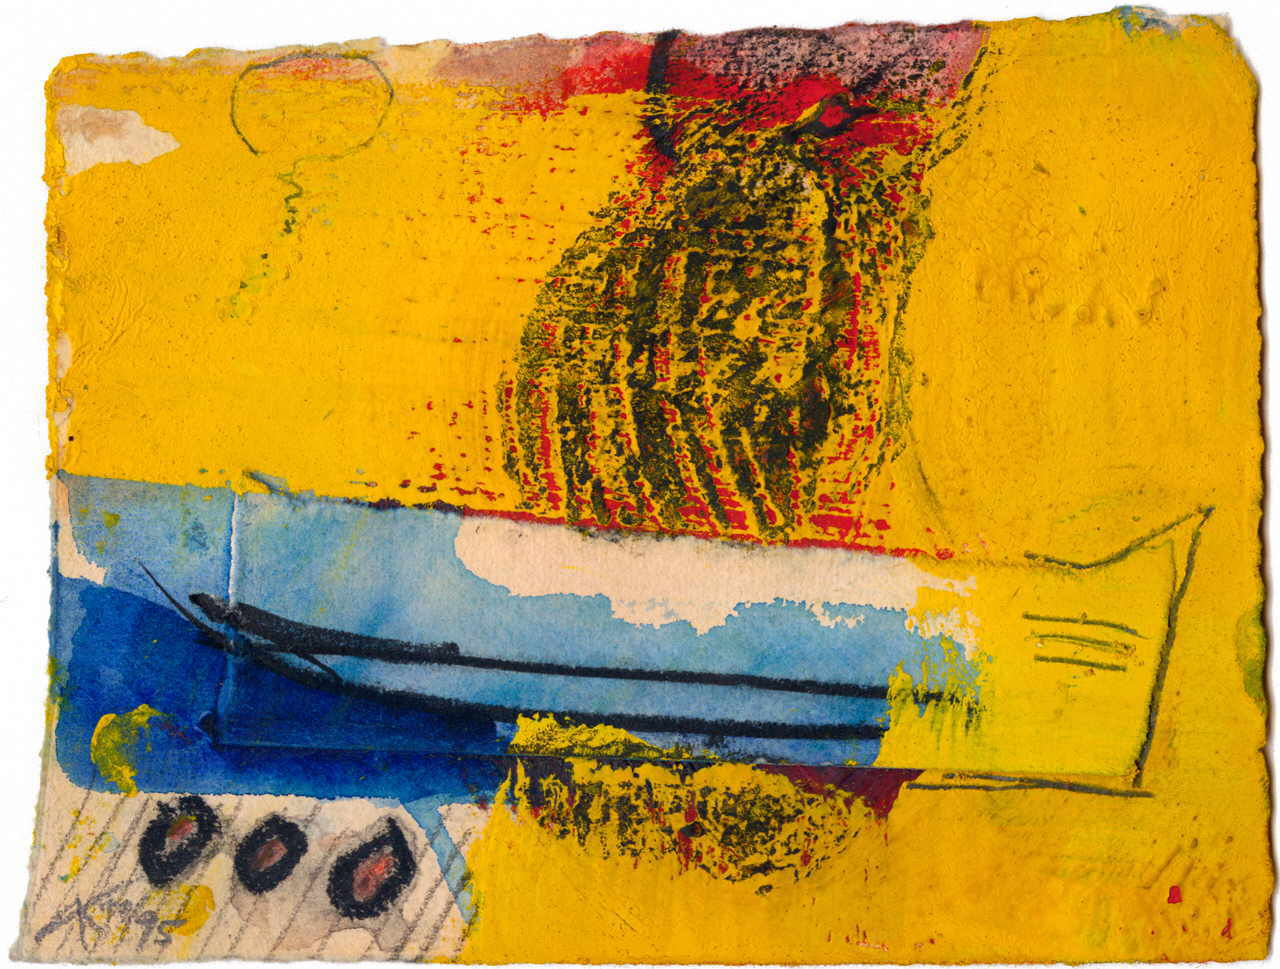 Ak Anatole 
untitled, 1995
mixed media, collage / handmade paper
16 x 20 cm